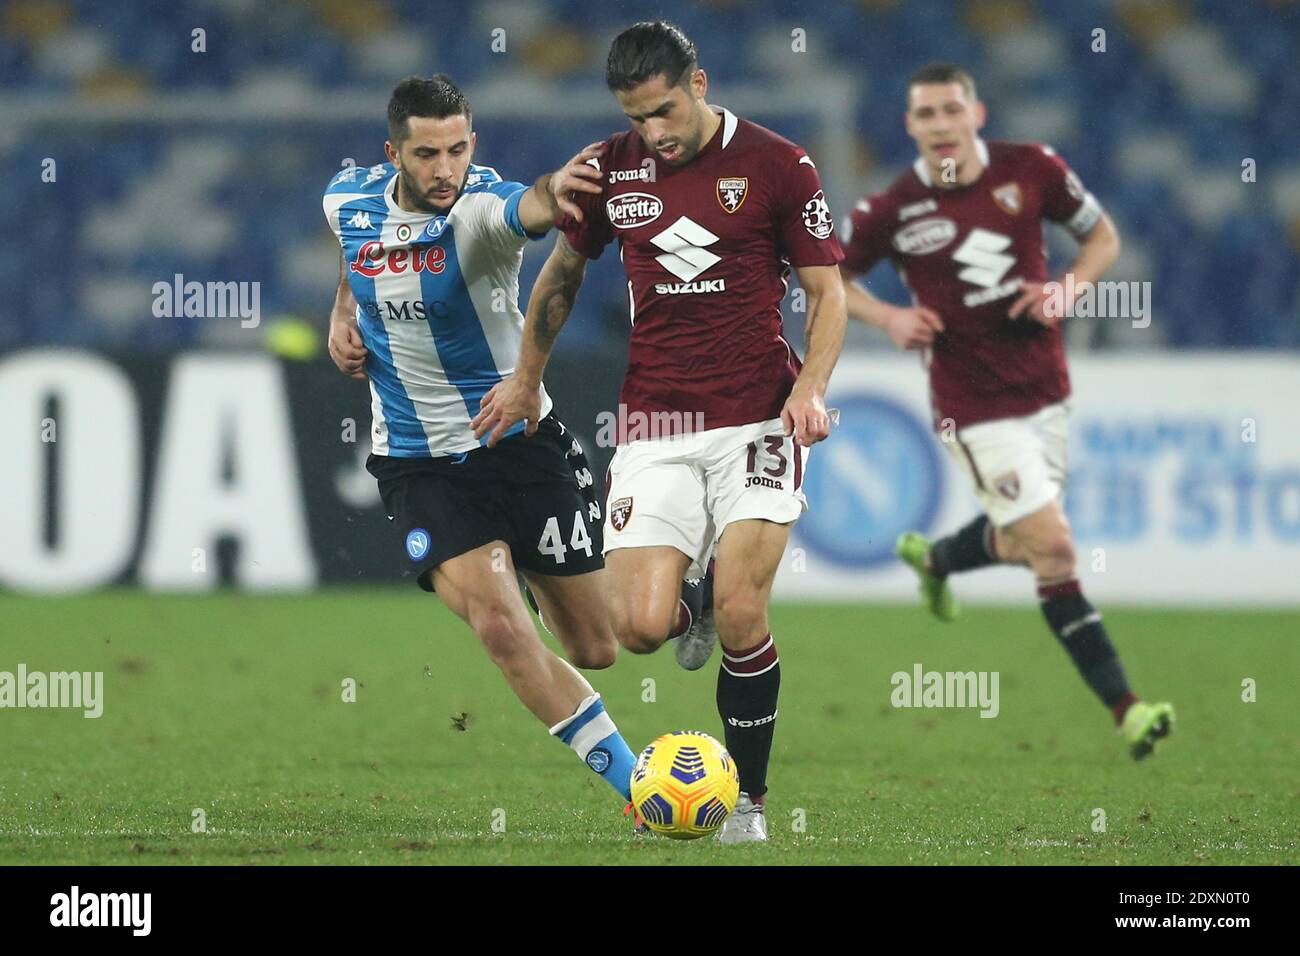 Ssc Napoli S Greek Defender Konstantinos Manolas L Challenges For The Ball With Torino S Swiss Defender Ricardo Rodriguez During The Serie A Football Match Ssc Napoli Vs Torino Fc Stock Photo Alamy